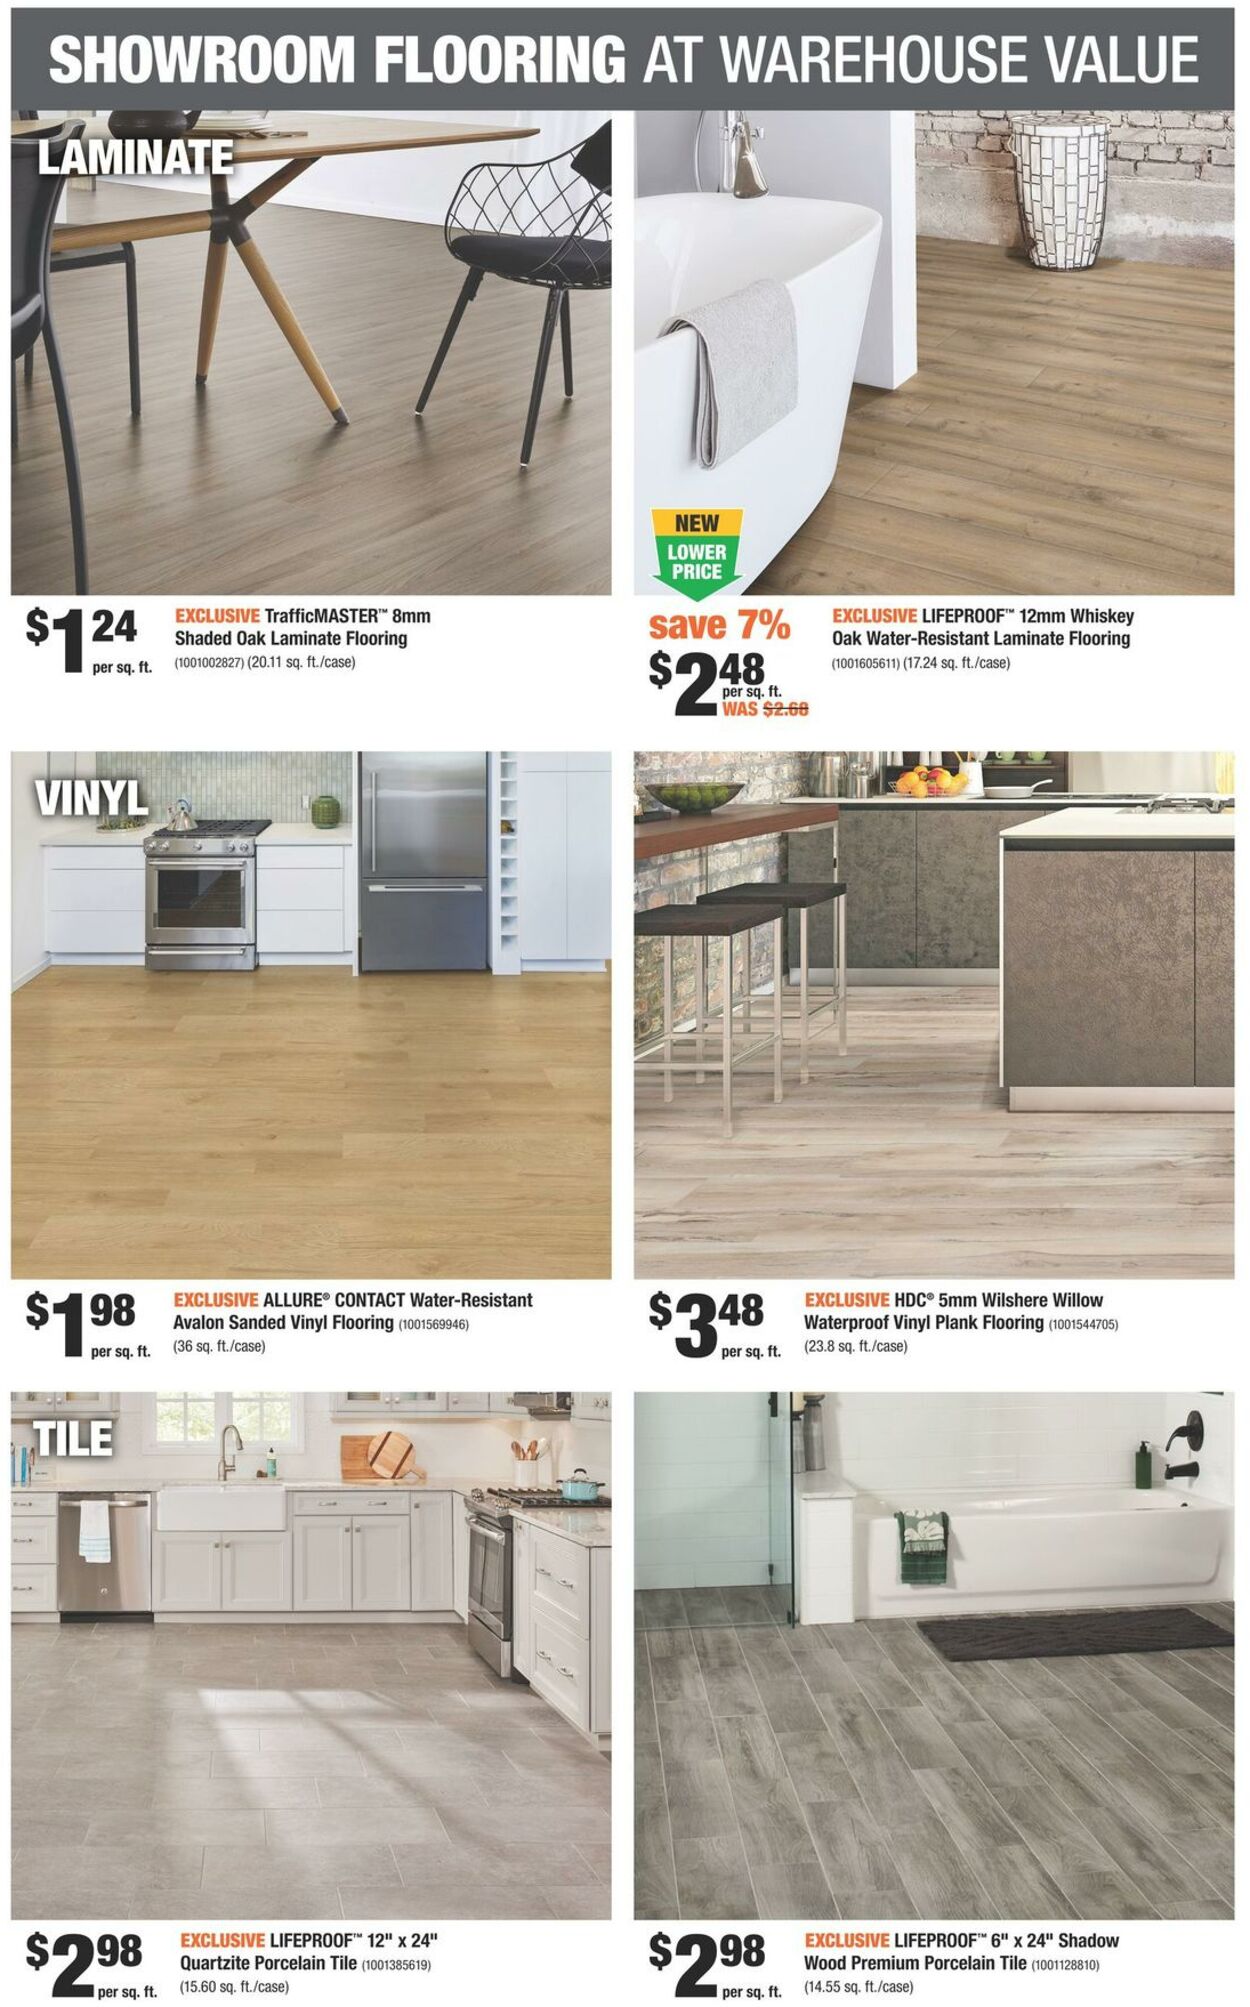 Circulaire Home Depot 28.04.2022 - 04.05.2022